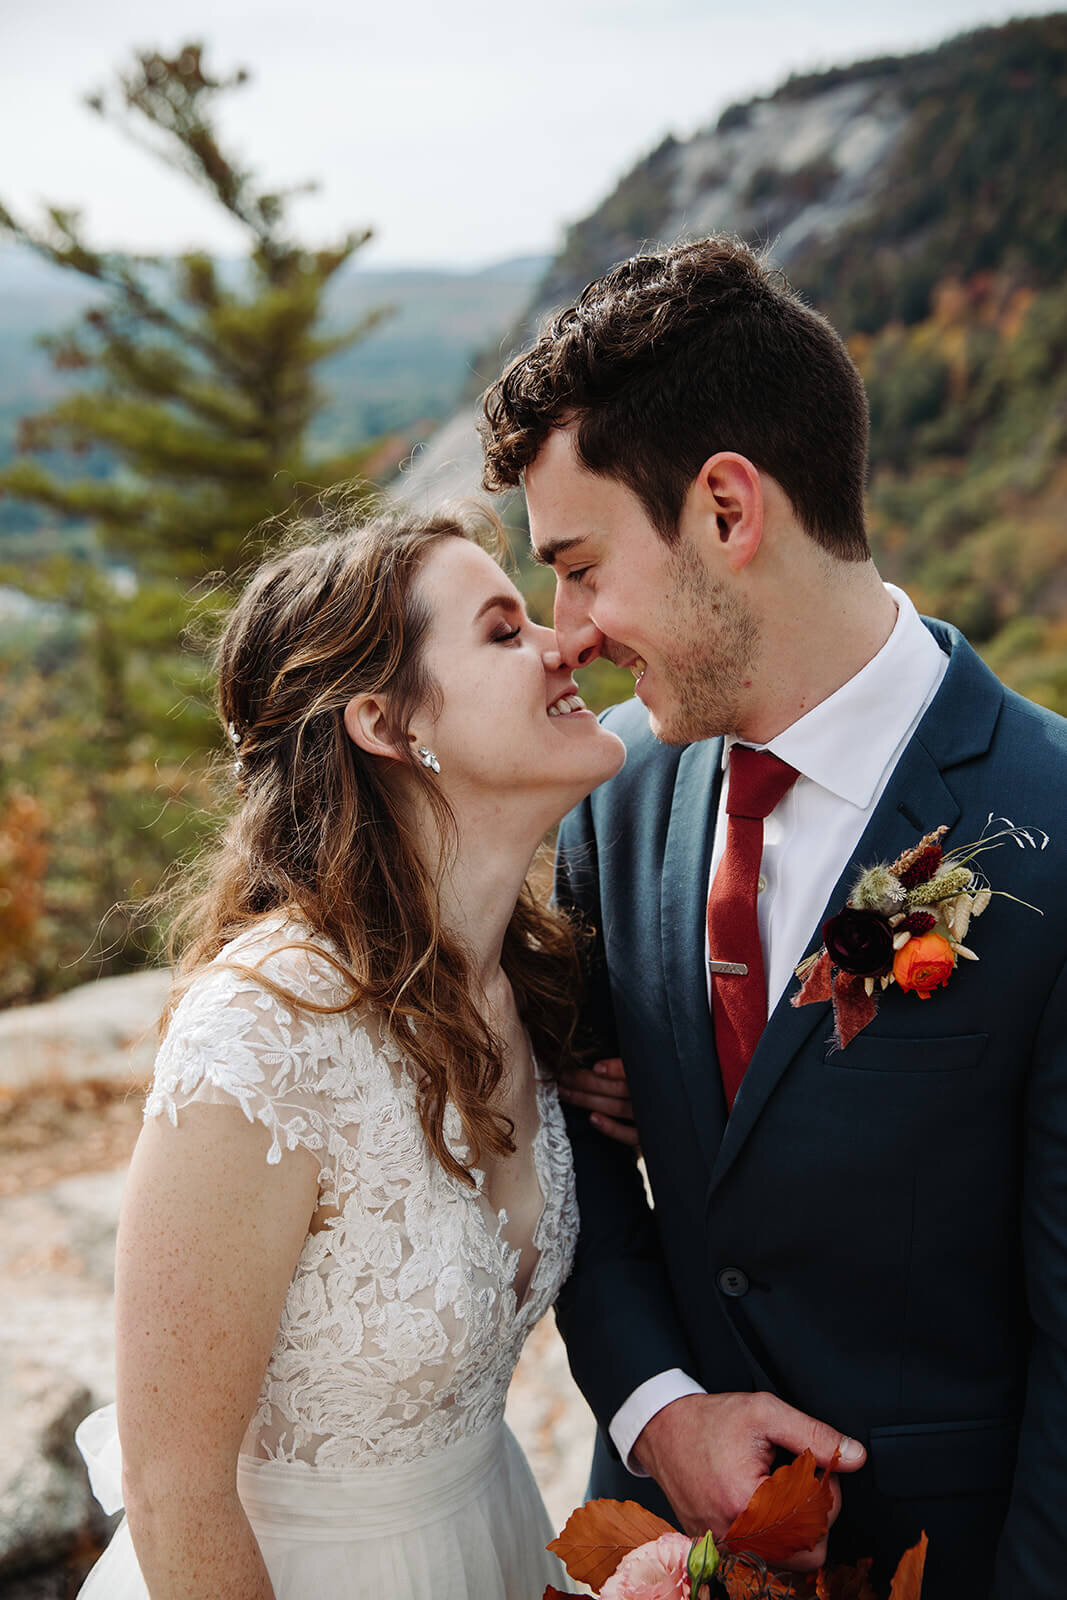  The couple steals a quiet moment after their elopement ceremony to take in the view and each other in the White Mountains in New Hampshire. New Hampshire elopement 